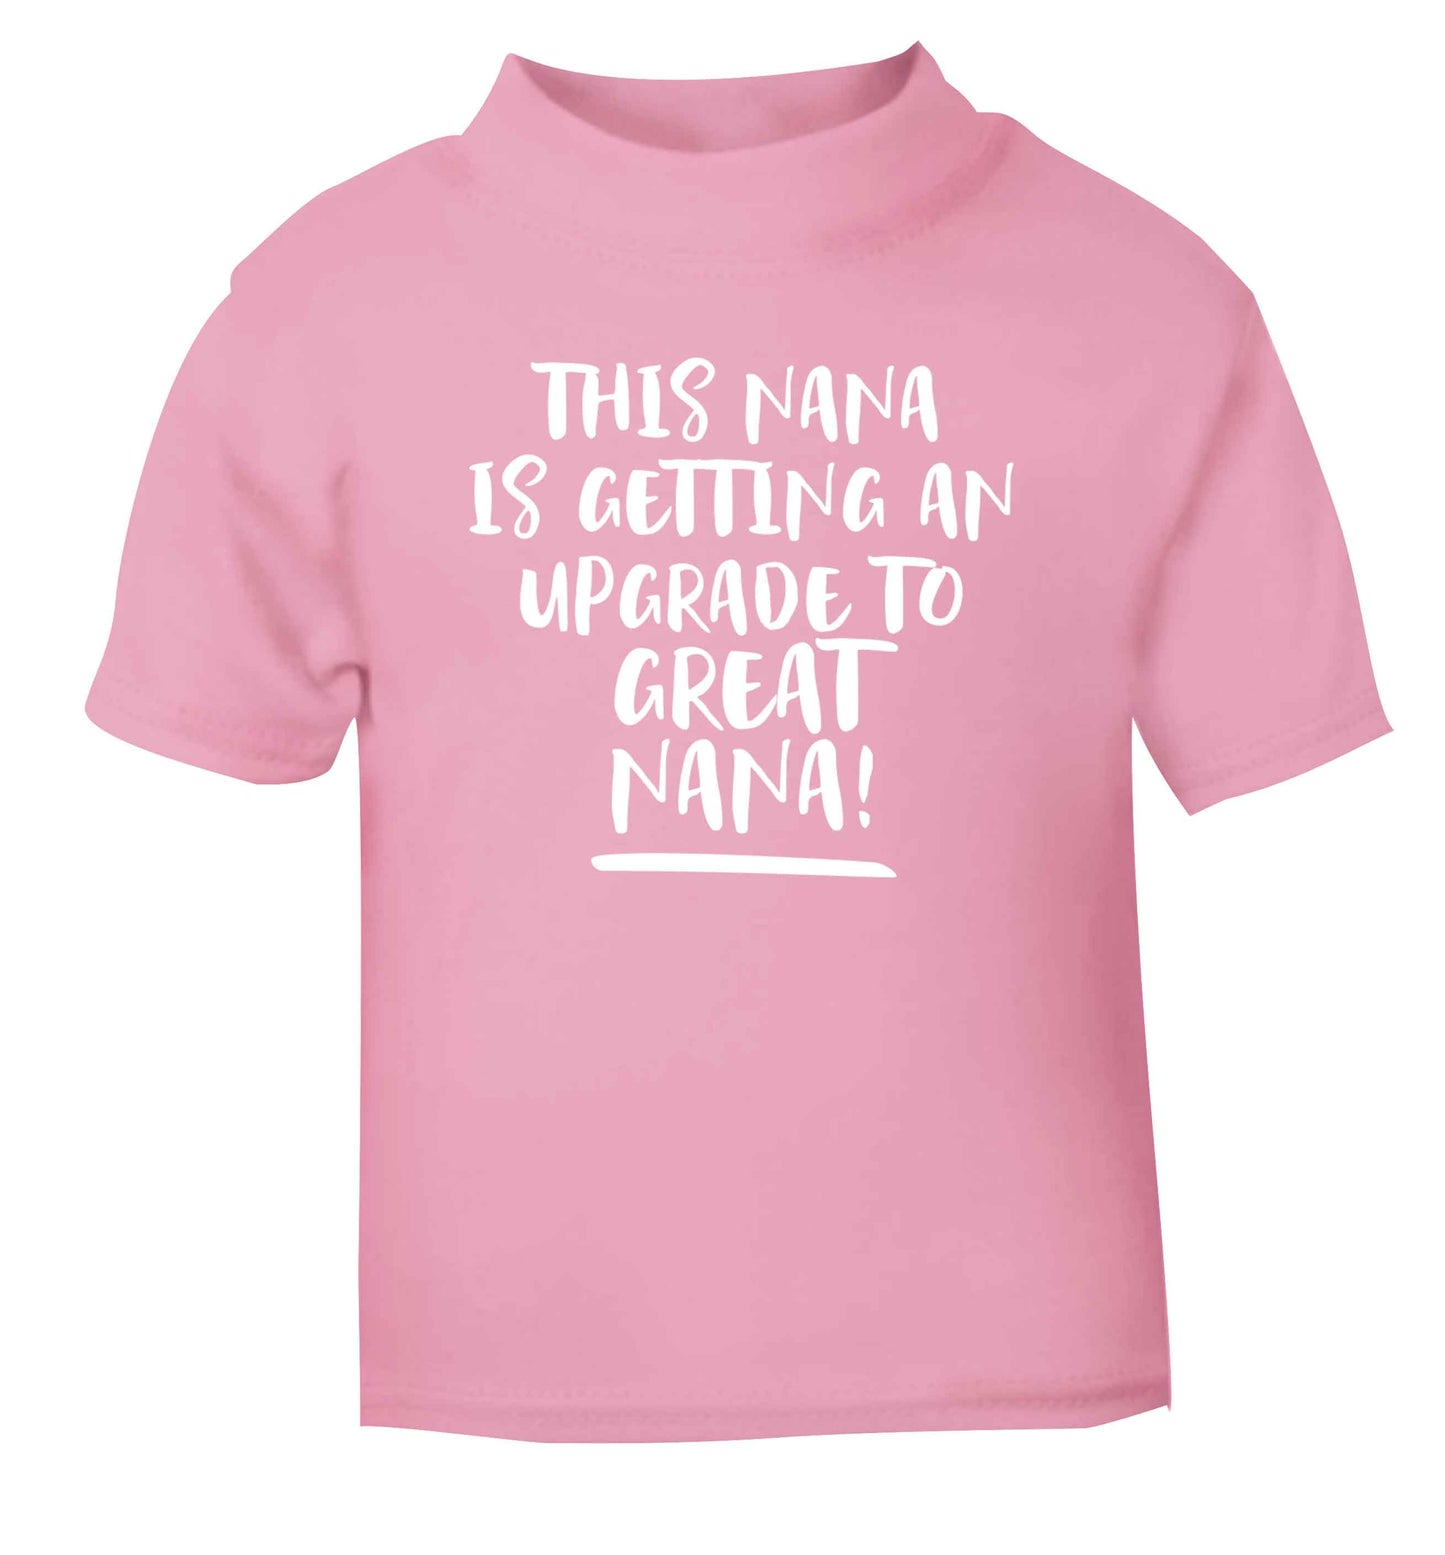 This nana is getting an upgrade to great nana! light pink Baby Toddler Tshirt 2 Years